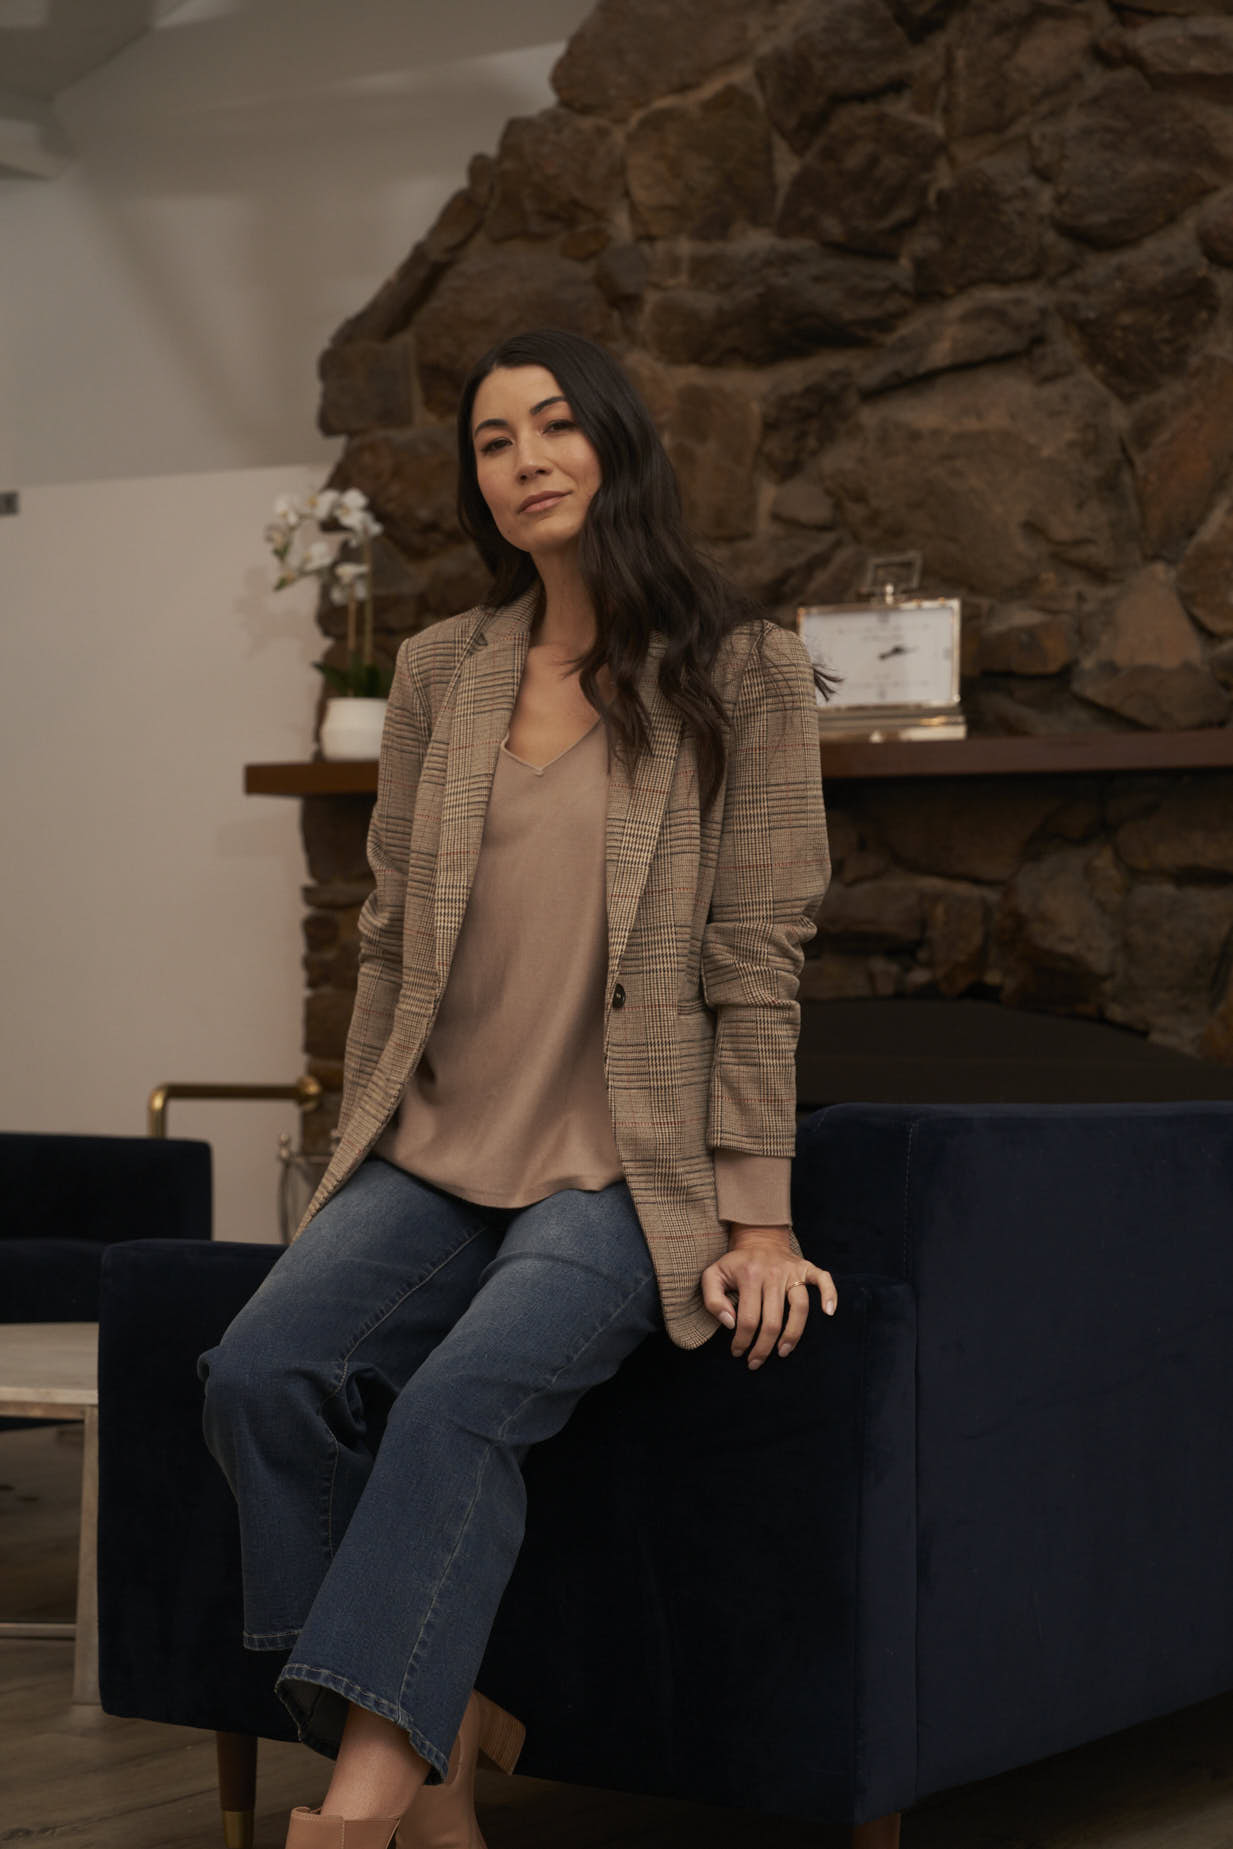 ***NEW*** Portsea Stretch Blazer | Betty Basics | It doesn't get more classic than this versatile layering piece. We call it the Goldilocks of blazers: not too big, not too small and structured enough to wear over a | Ciao Bella Dresses